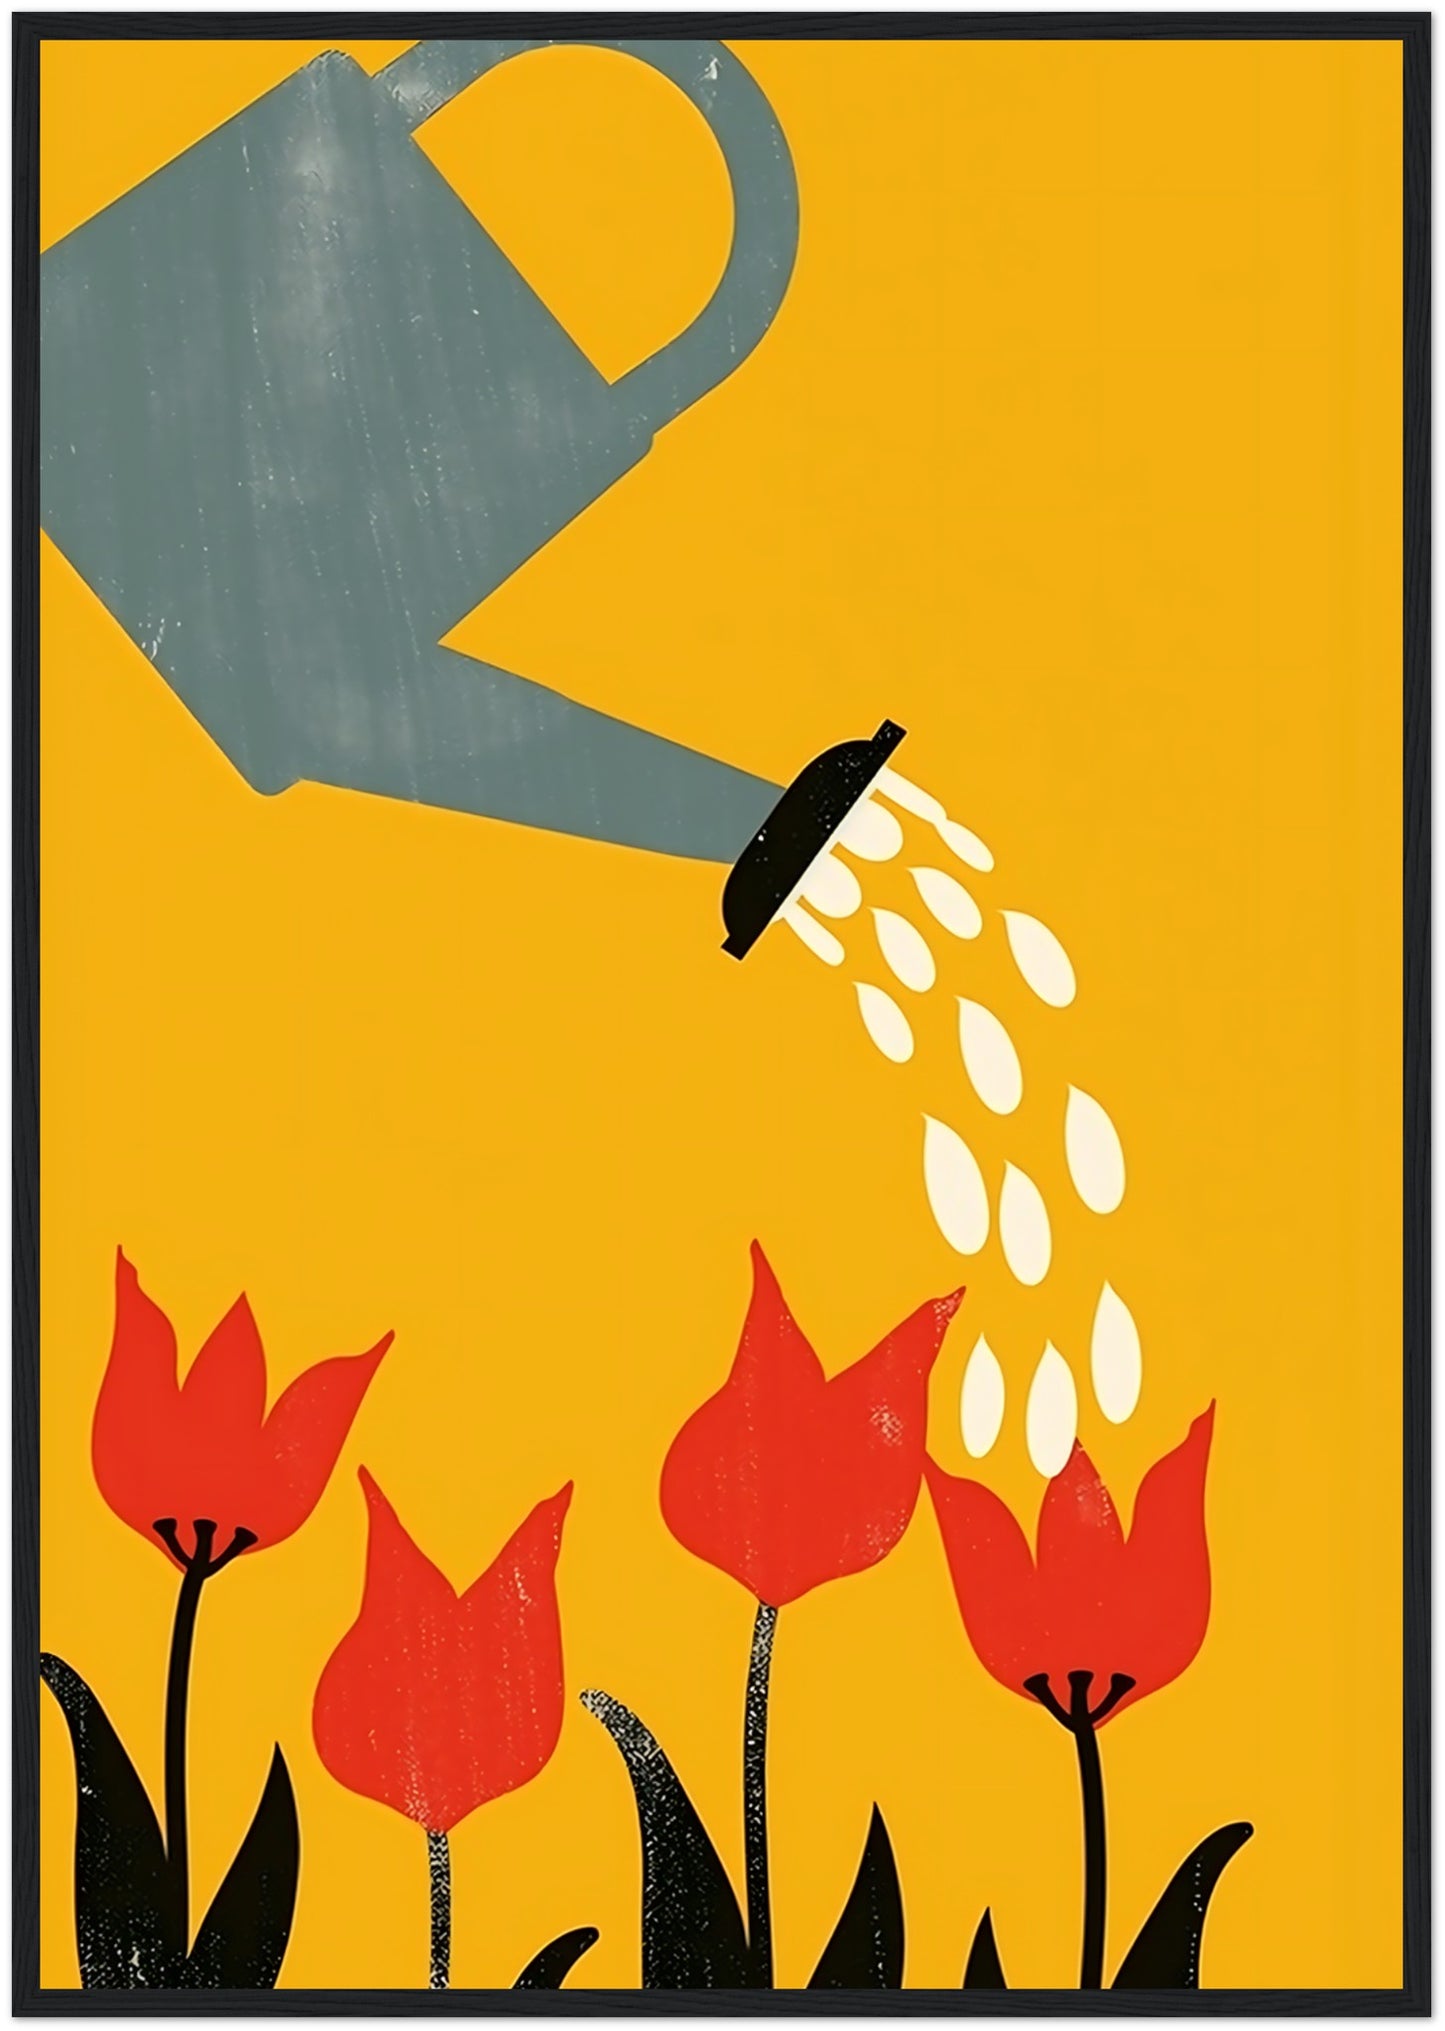 Illustration of a watering can pouring water onto red tulips against a yellow background.